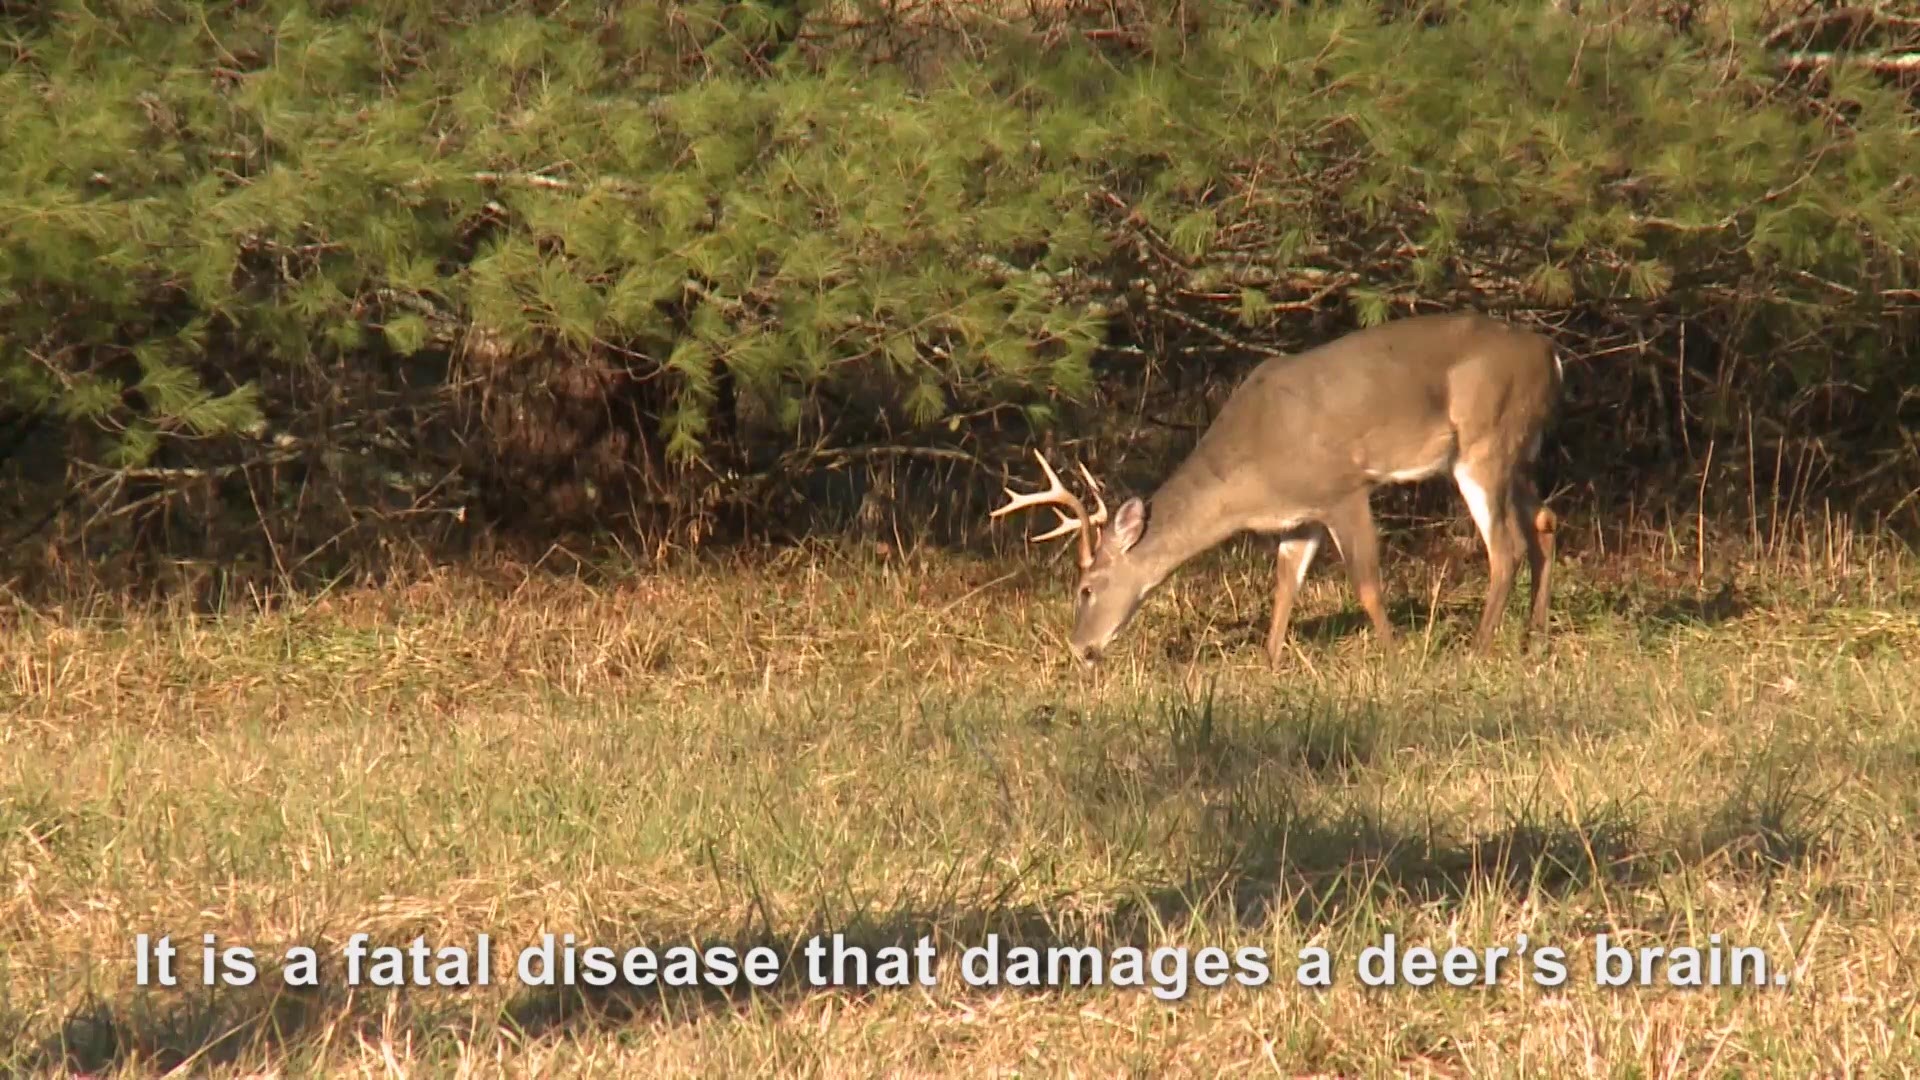 Here's everything you need to know about Chronic Wasting Disease.